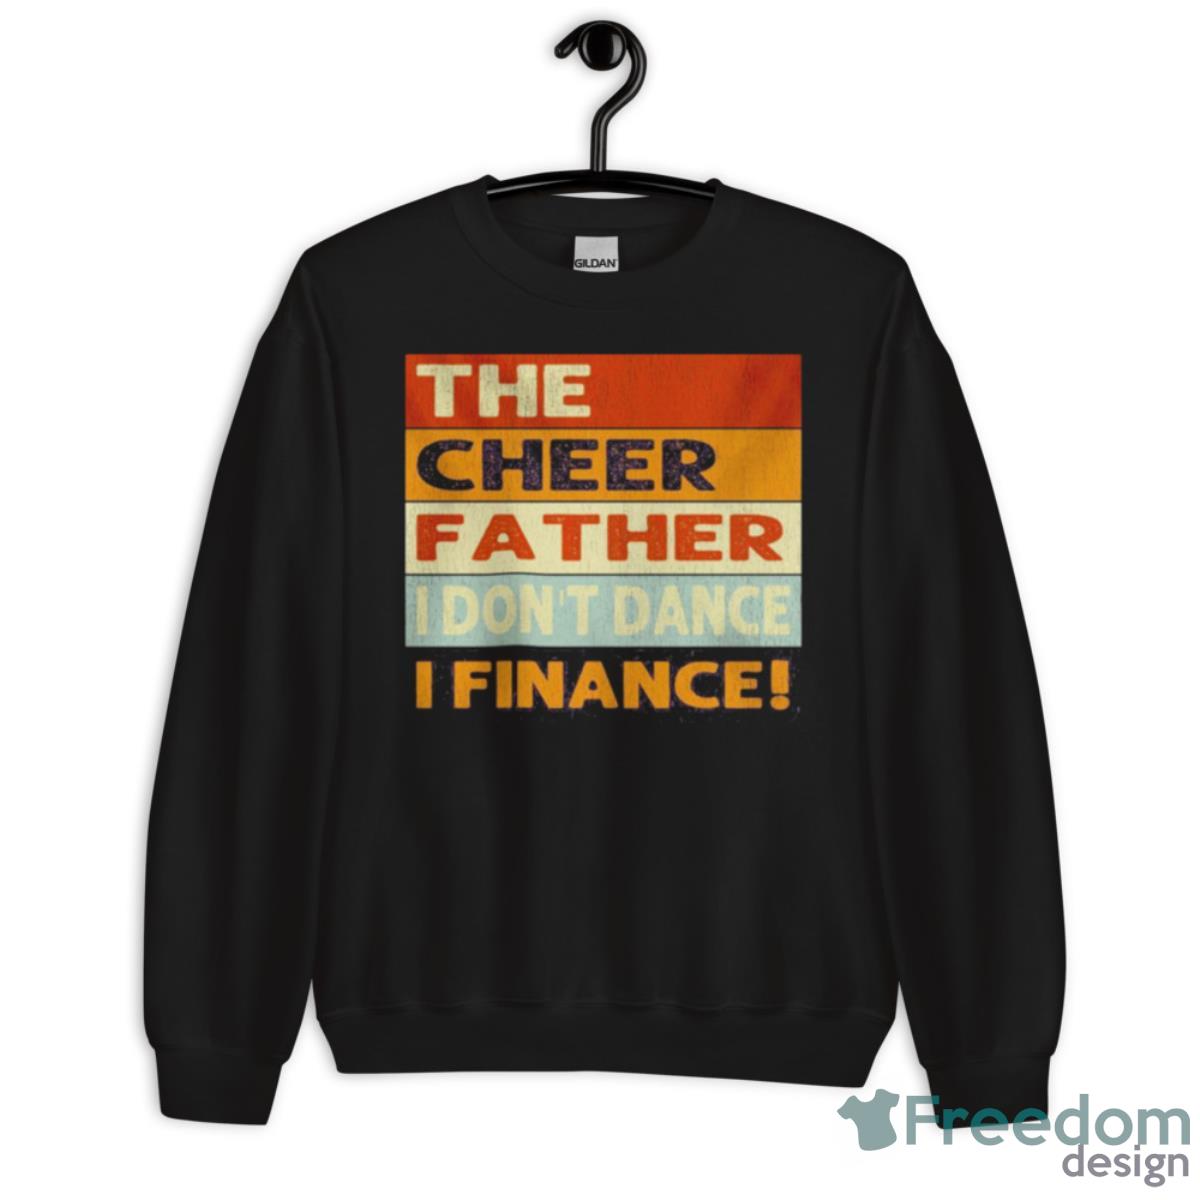 The Cheer Father I Don’t Dance I Finance Shirt